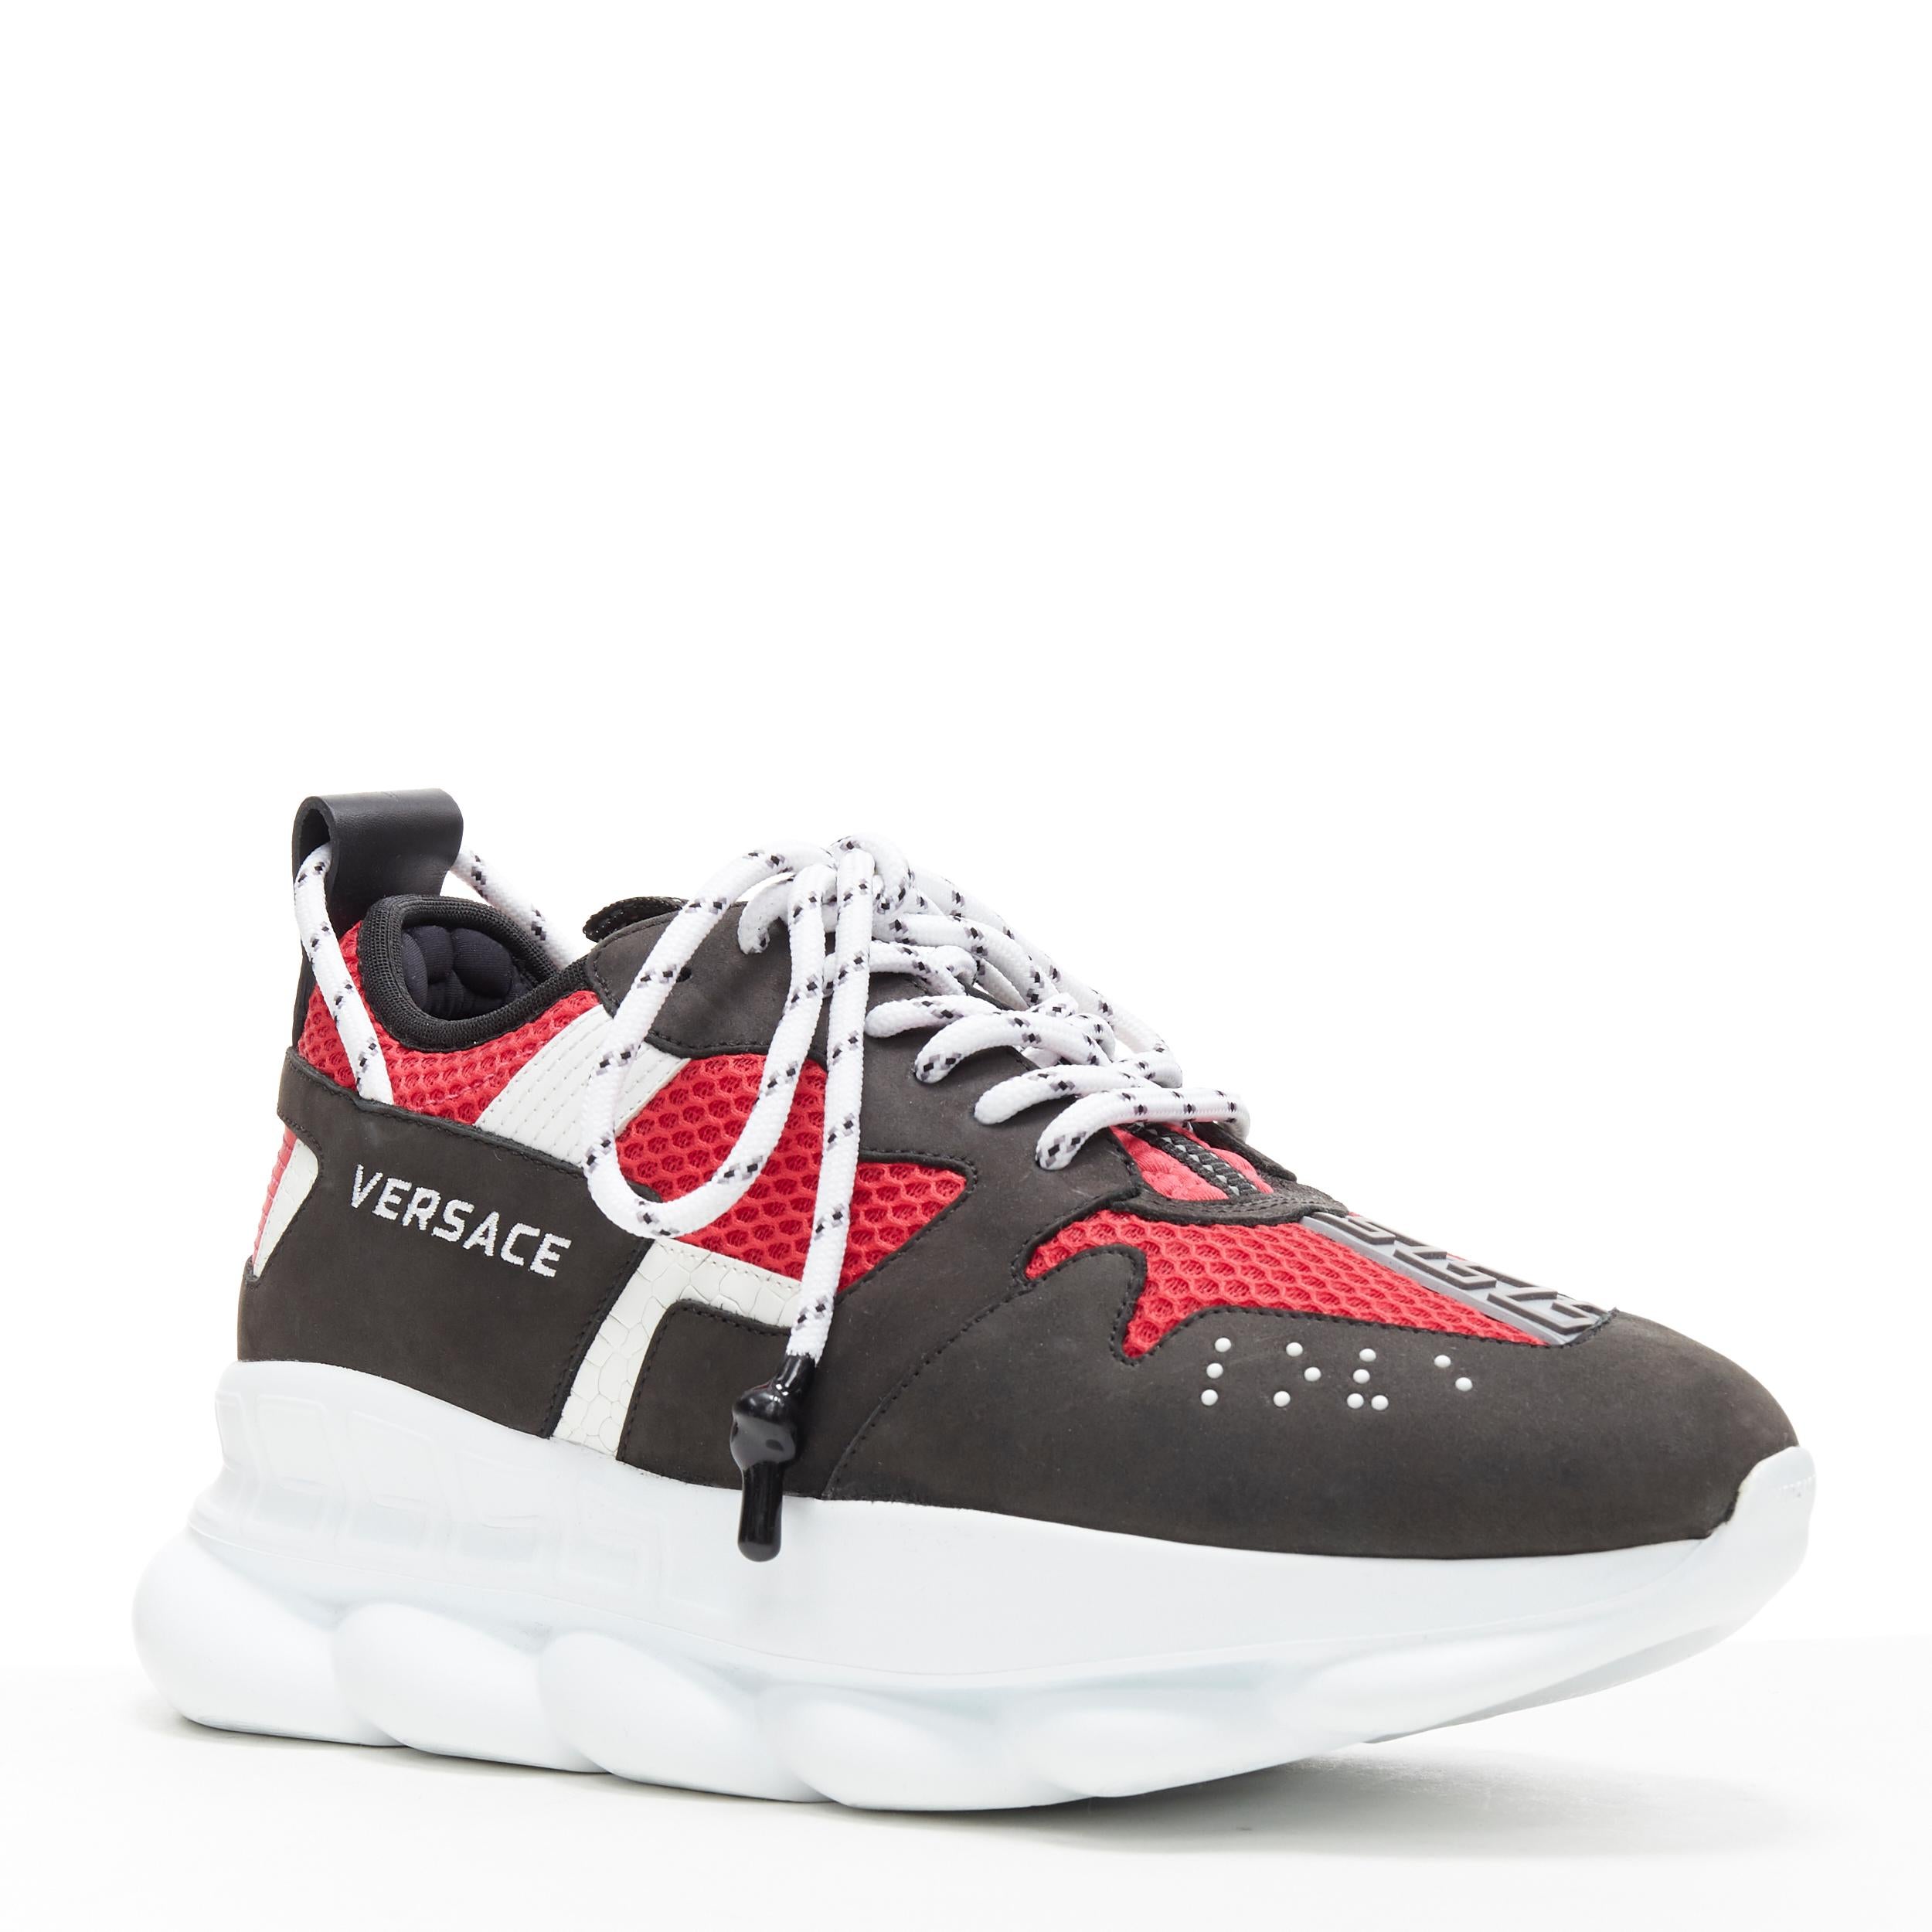 new VERSACE Chain Reaction black suede fuschia red low chunky sneaker EU37 US7 
Reference: TGAS/A06298 
Brand: Versace 
Designer: Salehe Bembury 
Model: Chain Reaction Black Red 
Material: Leather 
Color: Black 
Pattern: Solid 
Closure: Lace up